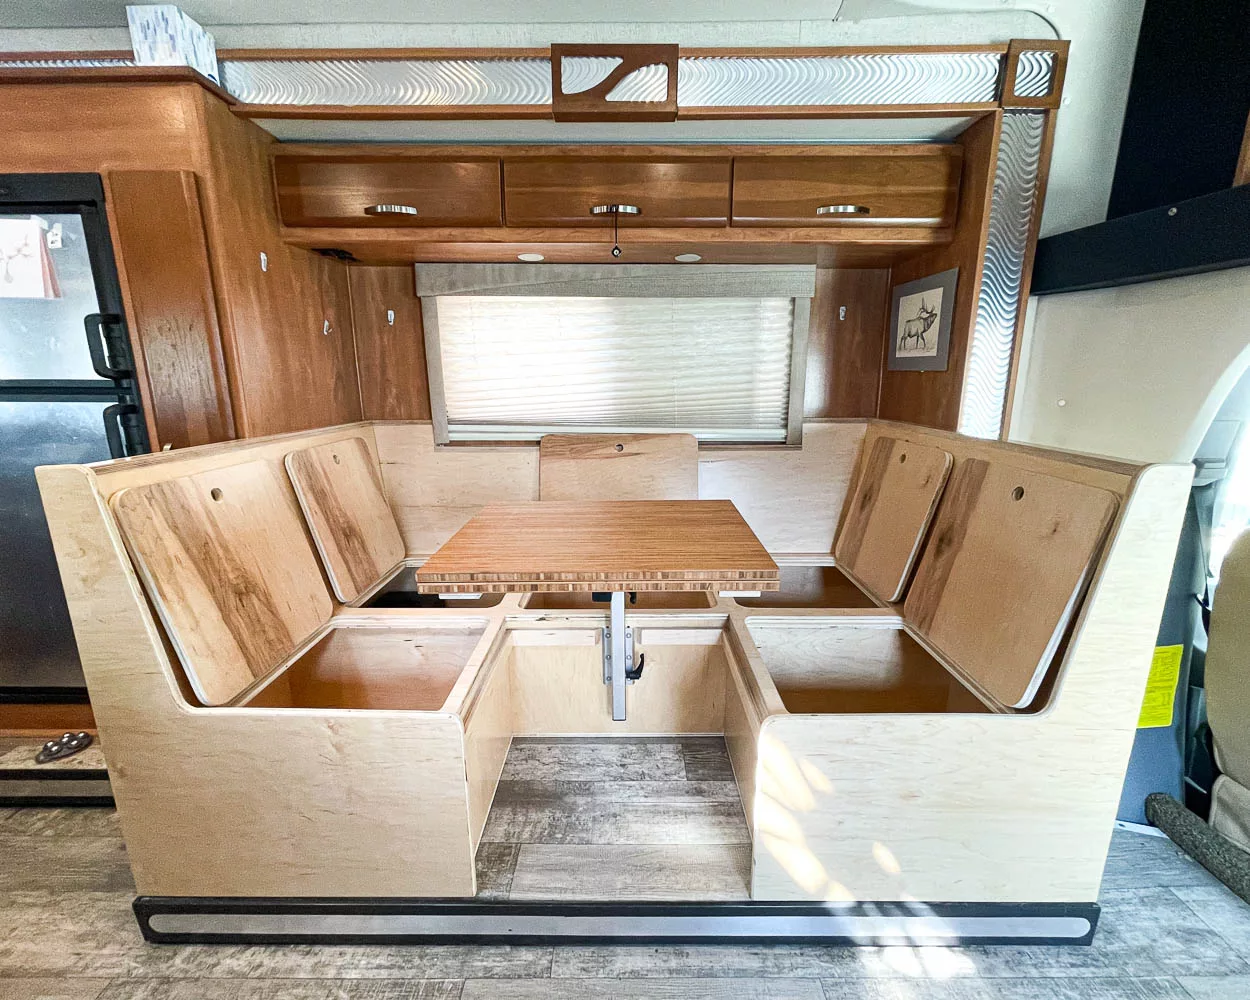 RV booth dinette upgrade in a Sprinter Chassis RV featuring extra storage, swivel table and easy conversion to a bed.